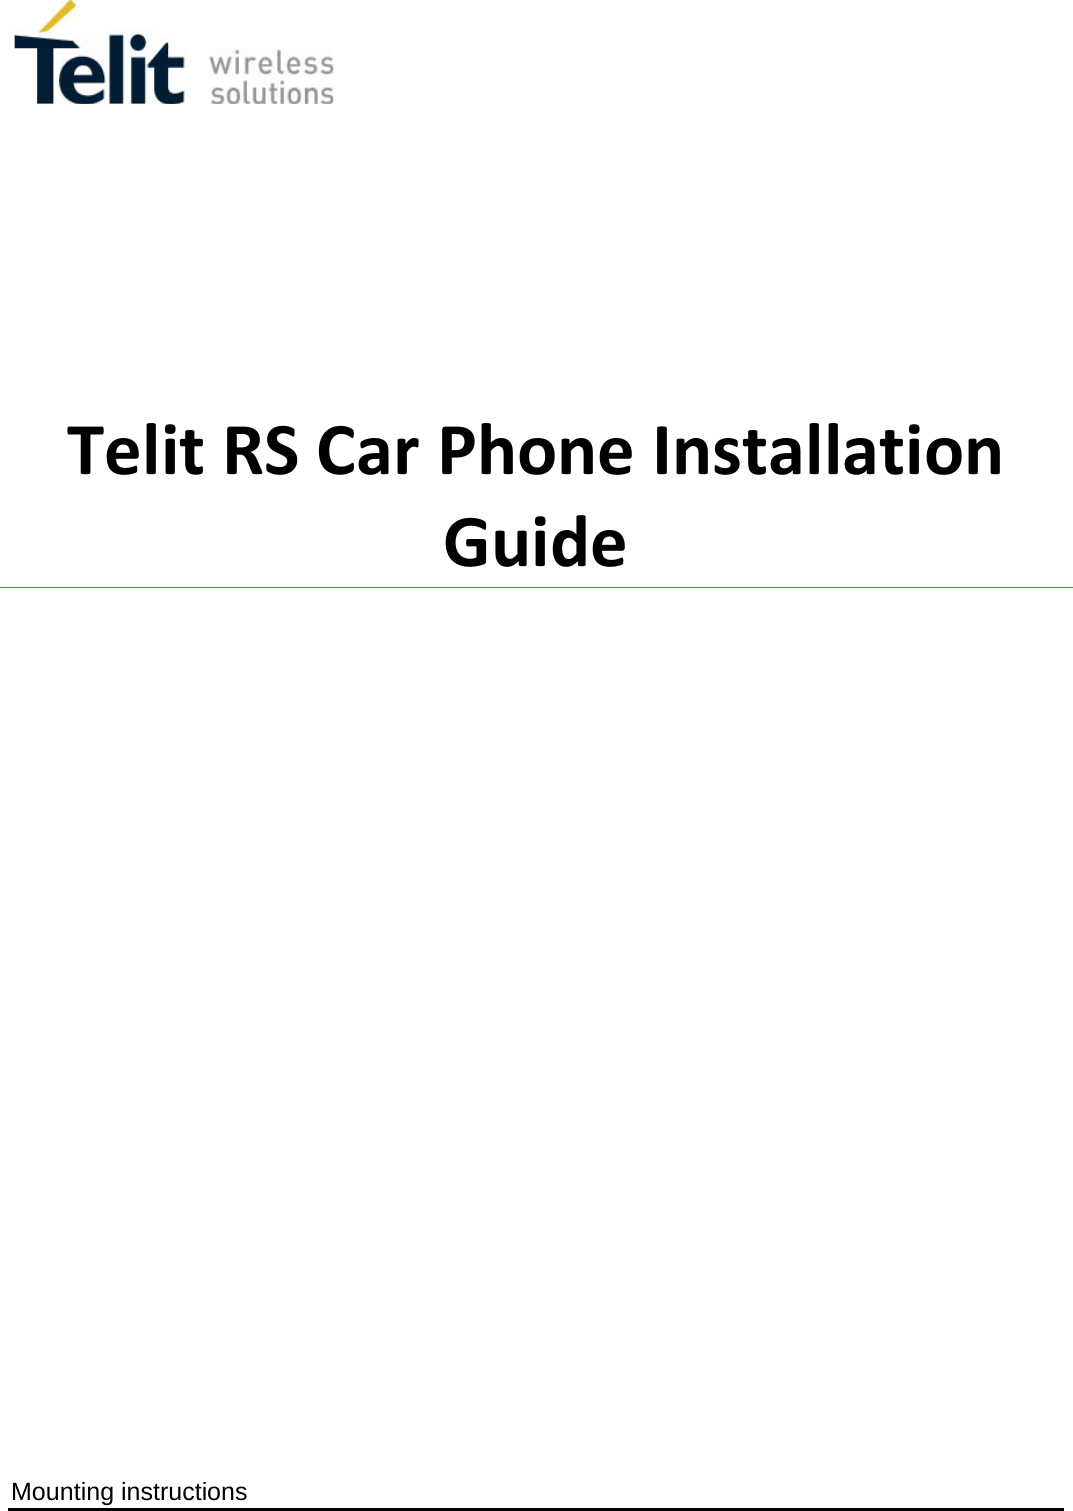  Mounting instructions    Telit RS Car Phone Installation Guide             